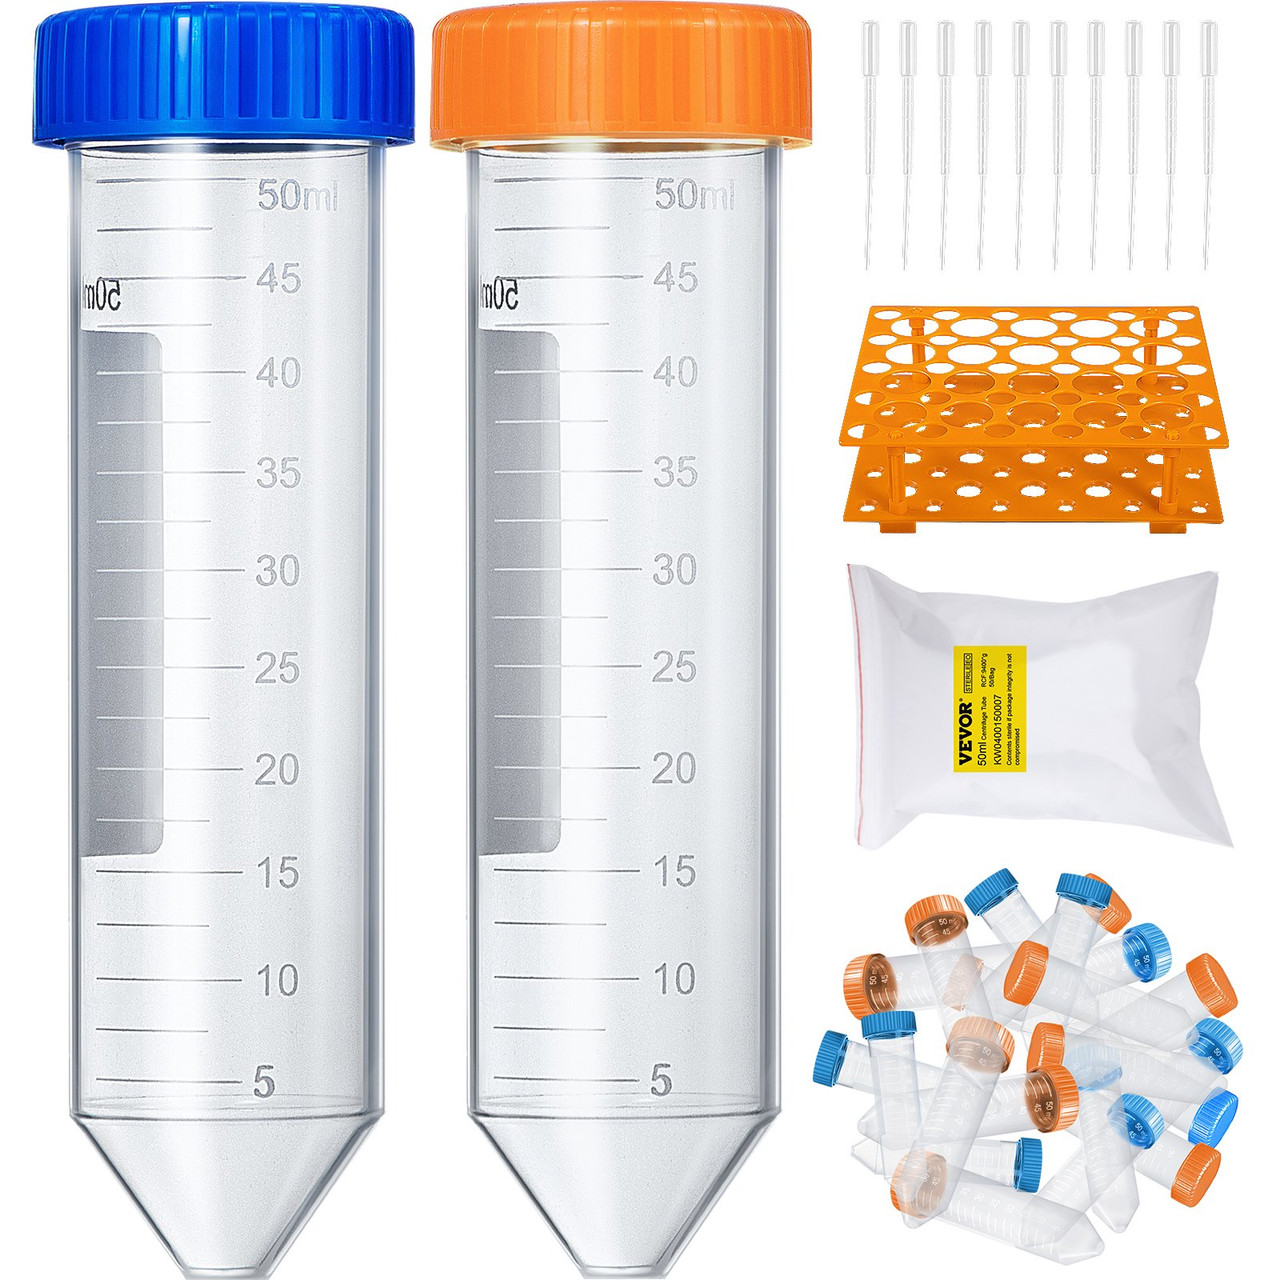 Conical Centrifuge Tubes 50mL, 500Pcs Sterilized Graduated Conical Tubes DN/RNase Free Centrifuge Tubes with Screw Cap for Sample Storage & Separate, Write Mark & Rack Include,Blue & Orange